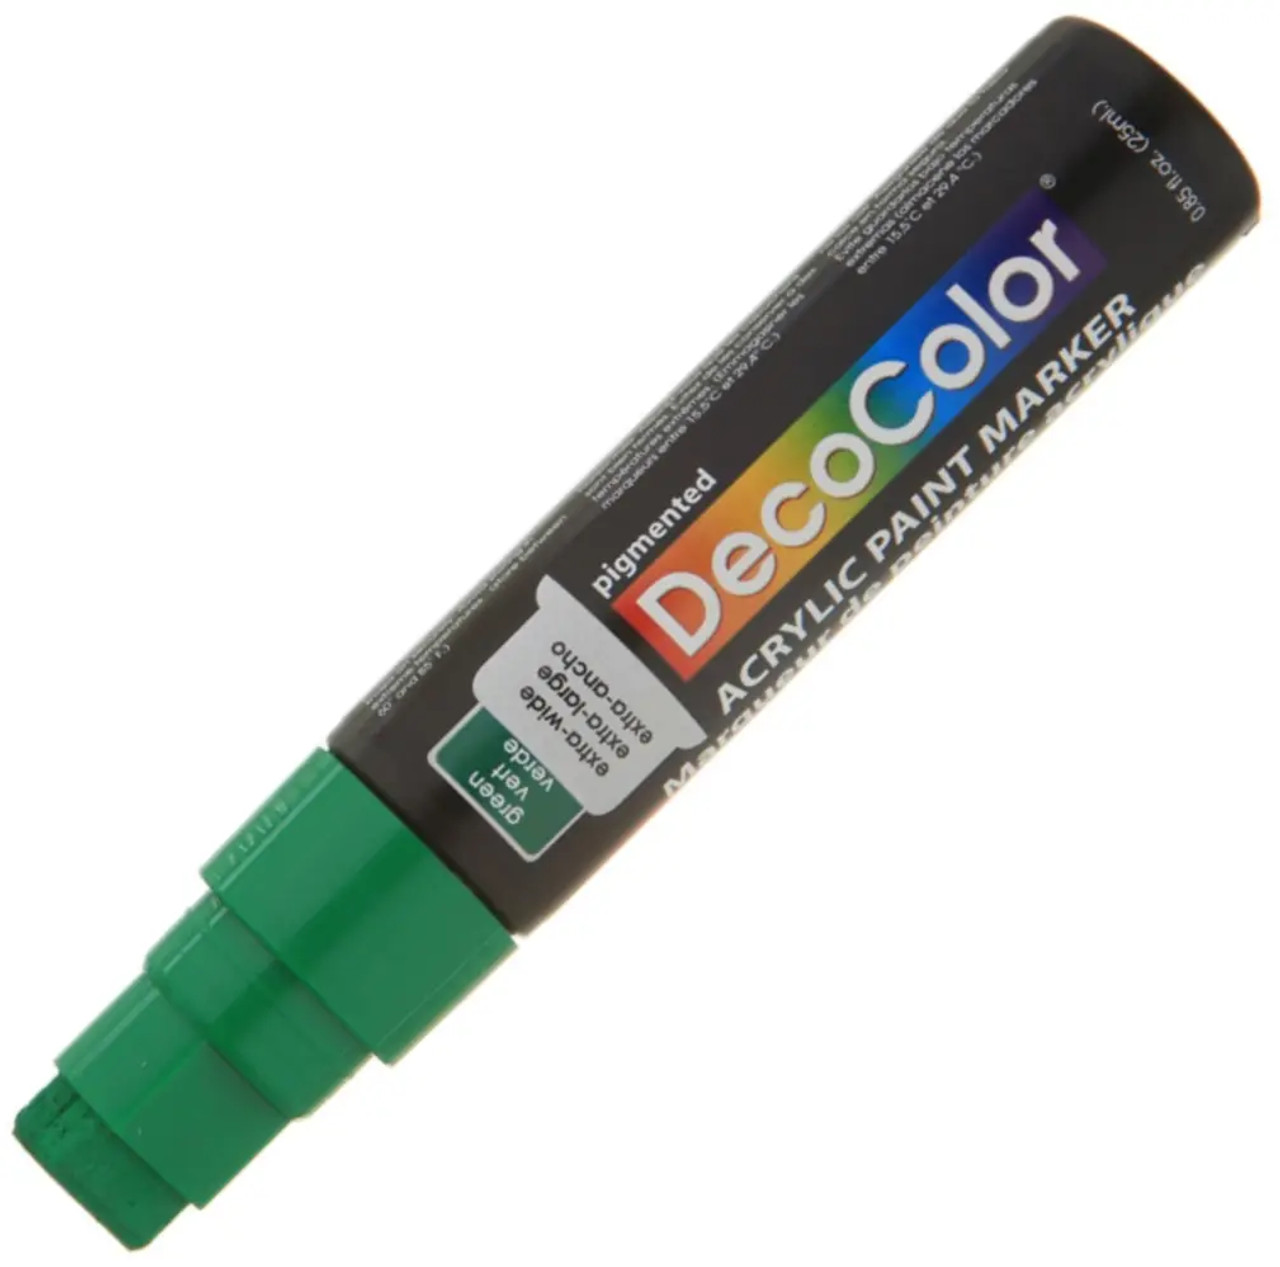 Deco Acrylic Paint Markers Review